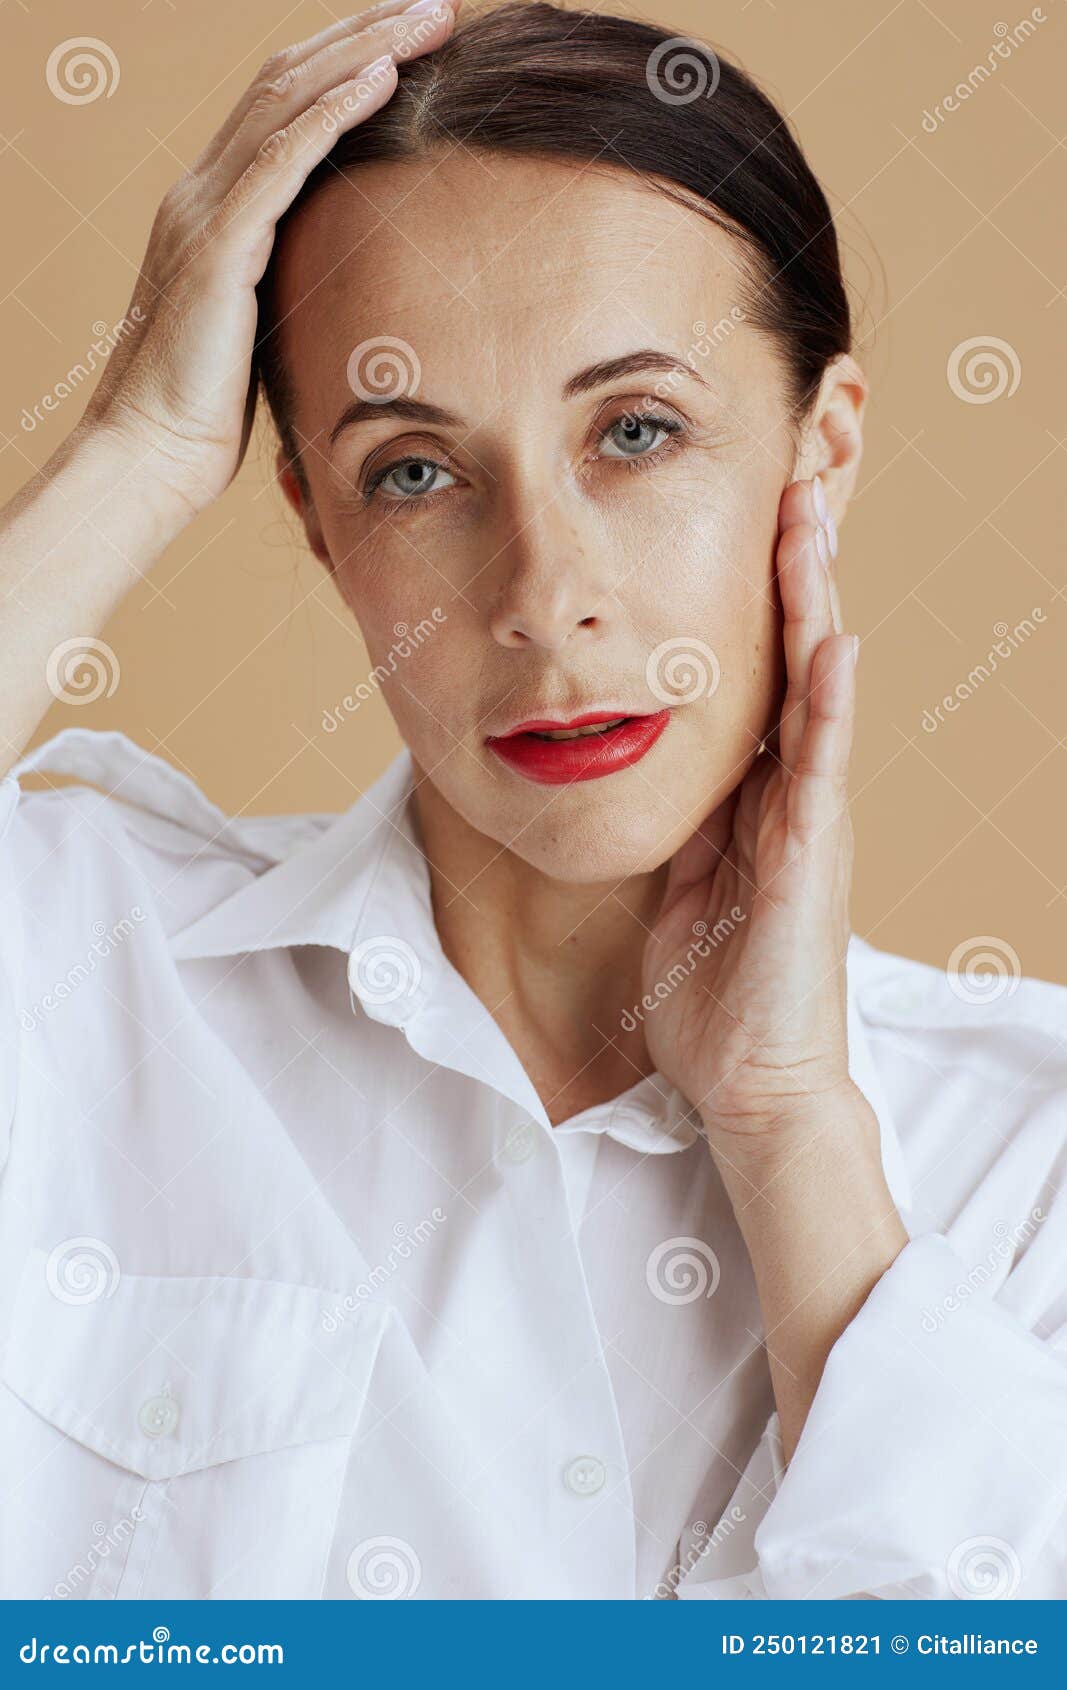 Modern Woman In White Shirt On Beige Background Stock Image Image Of Isolated Human 250121821